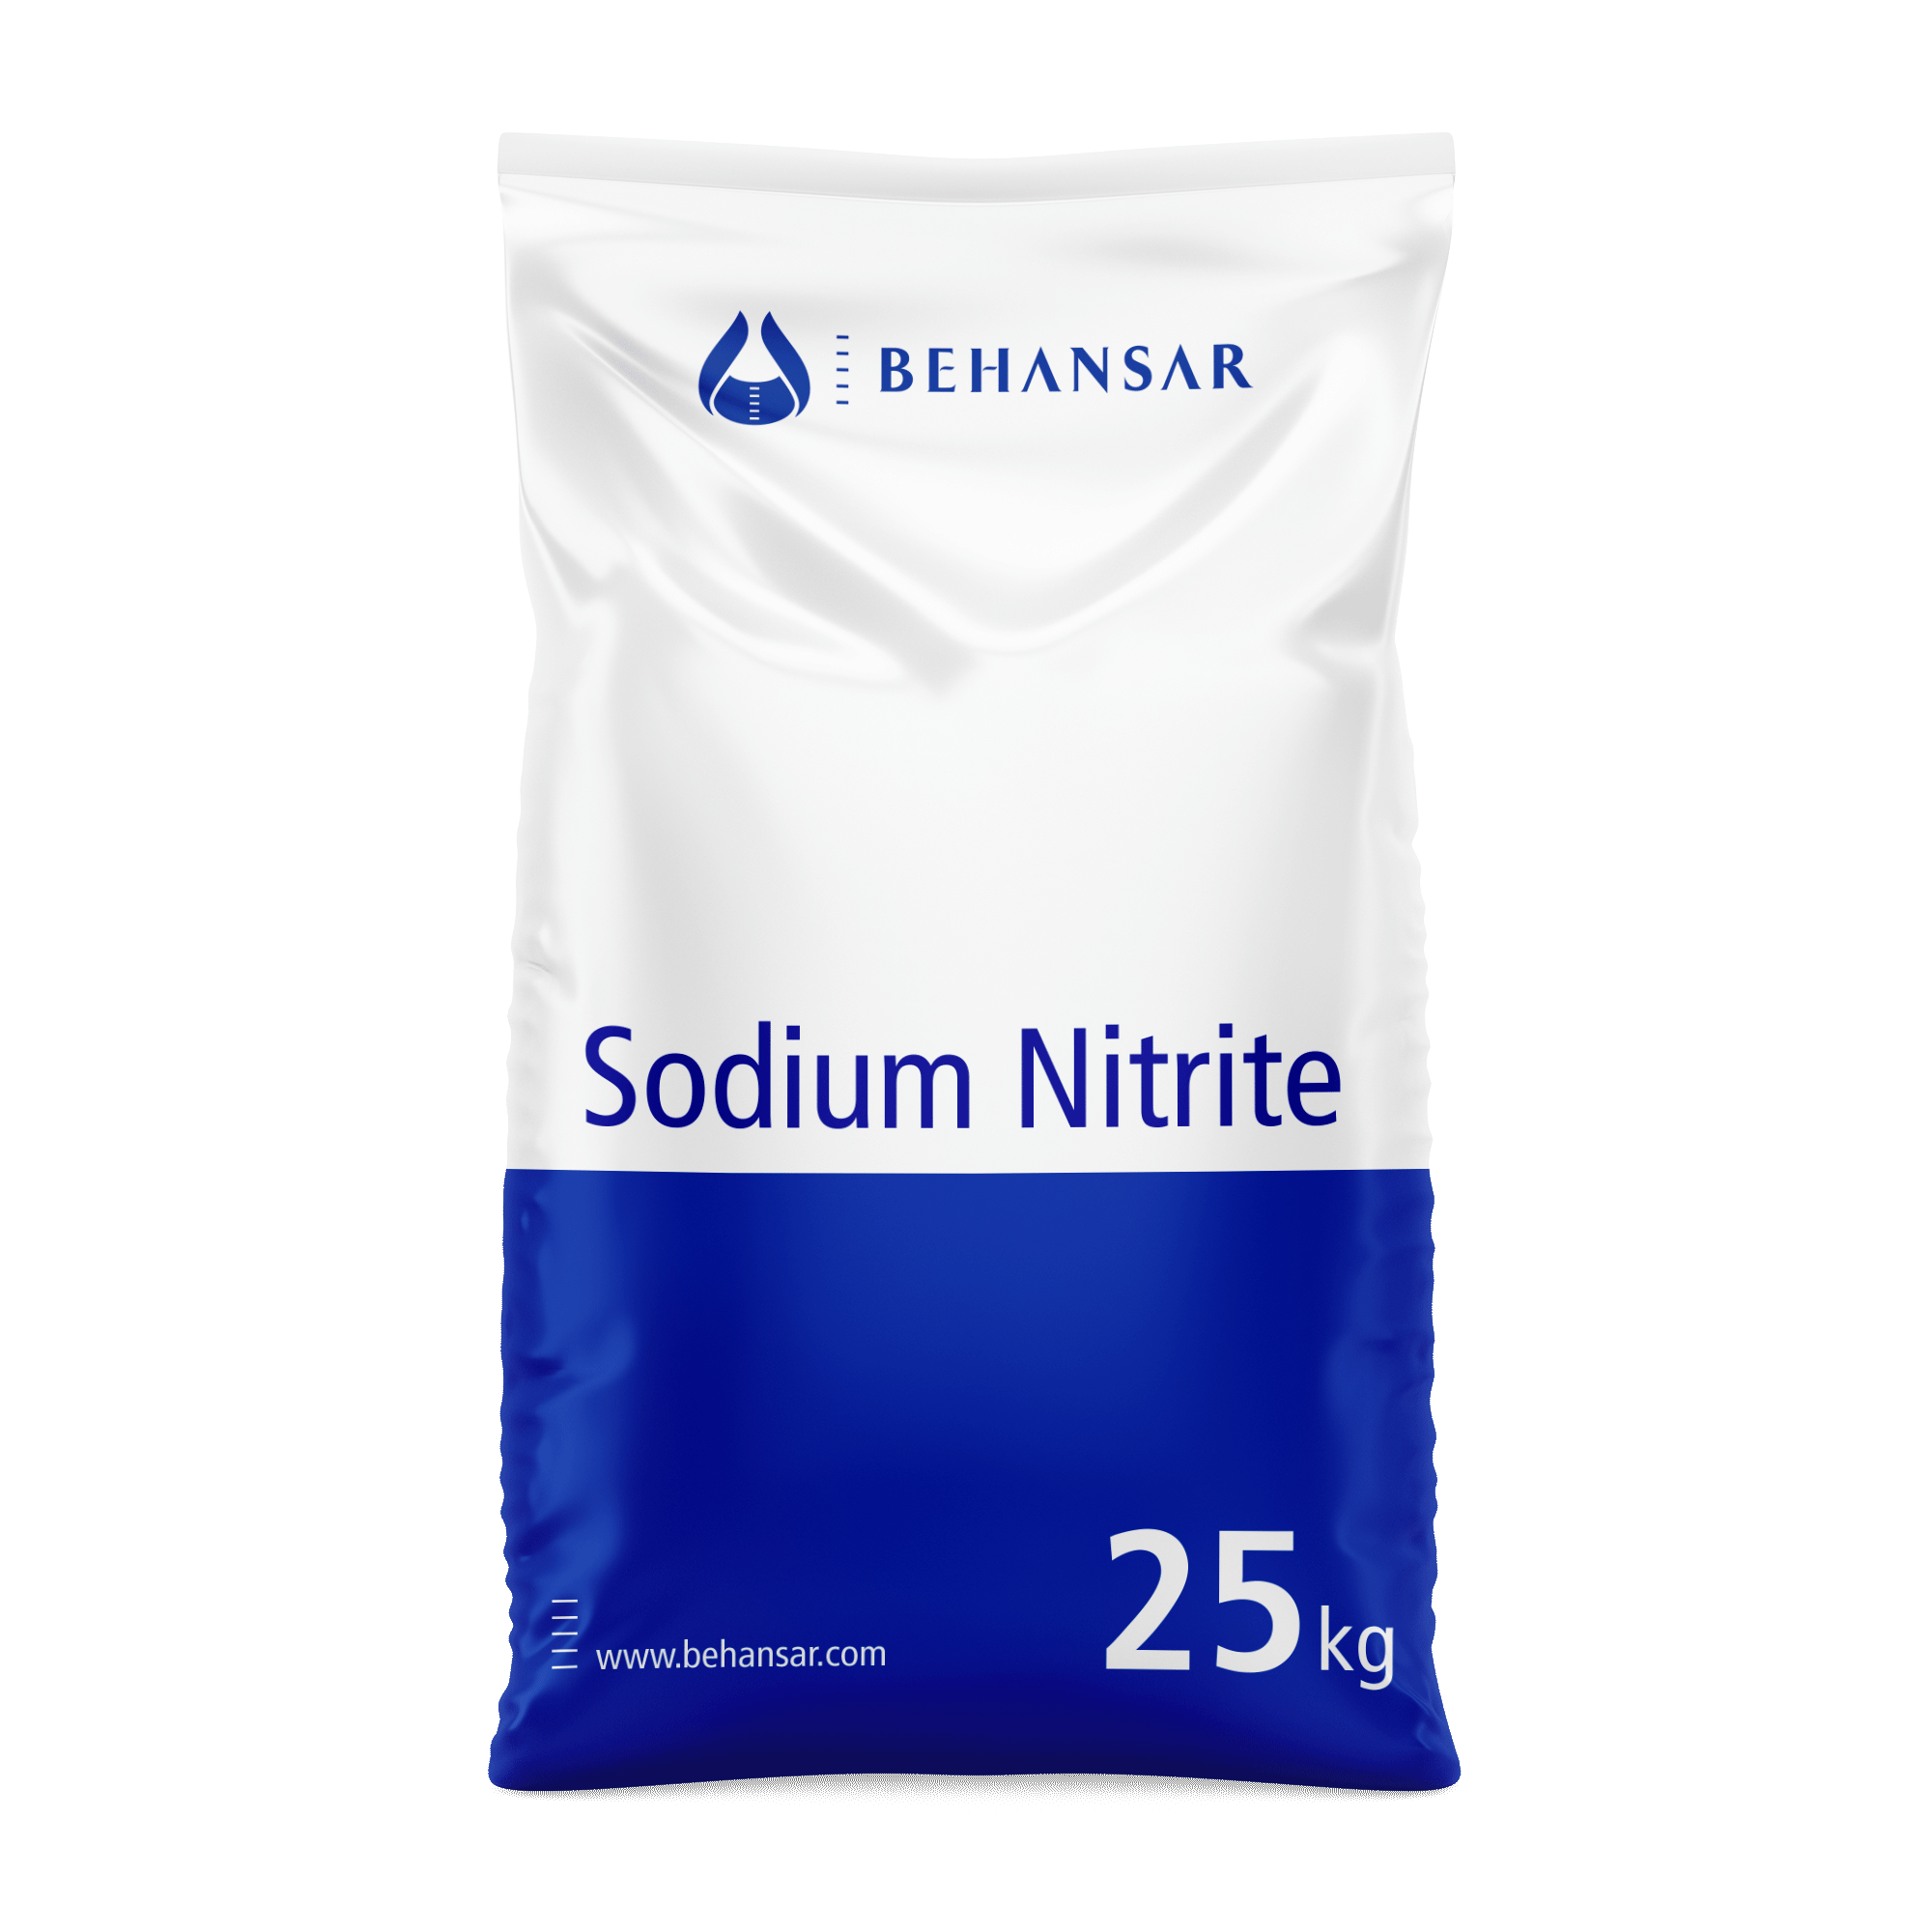 Sodium Nitrite is one of the products of Behansar Co